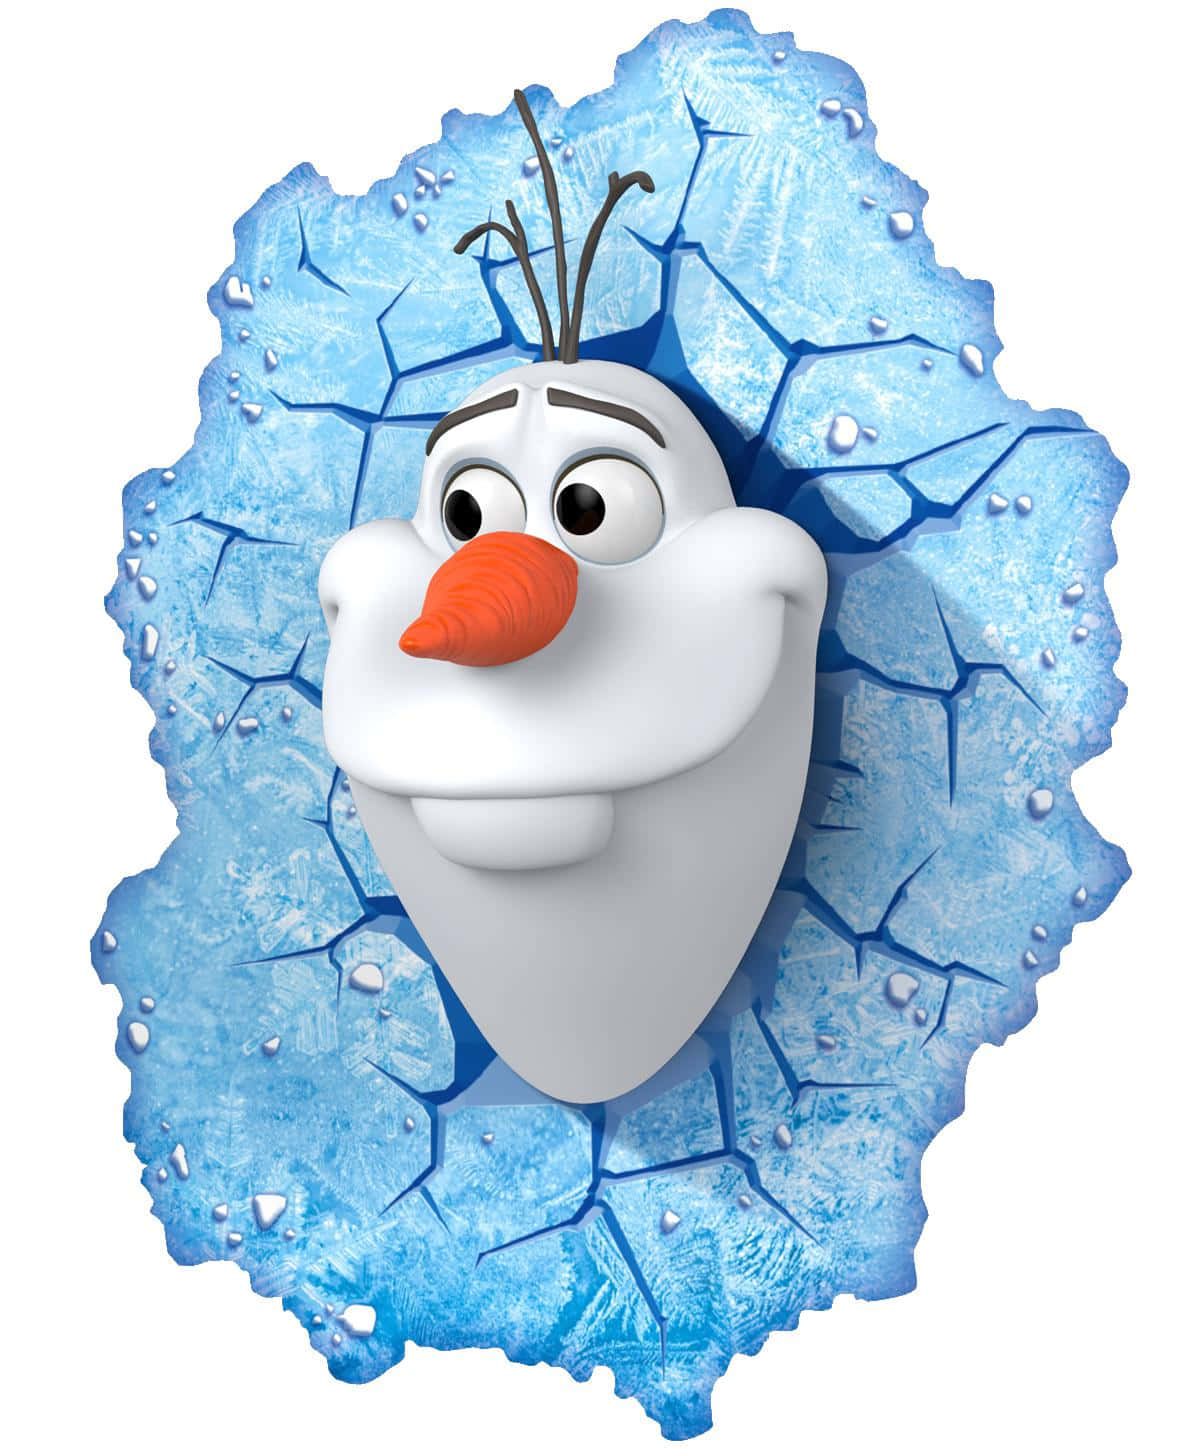 Let's have some fun in the snow with Olaf!